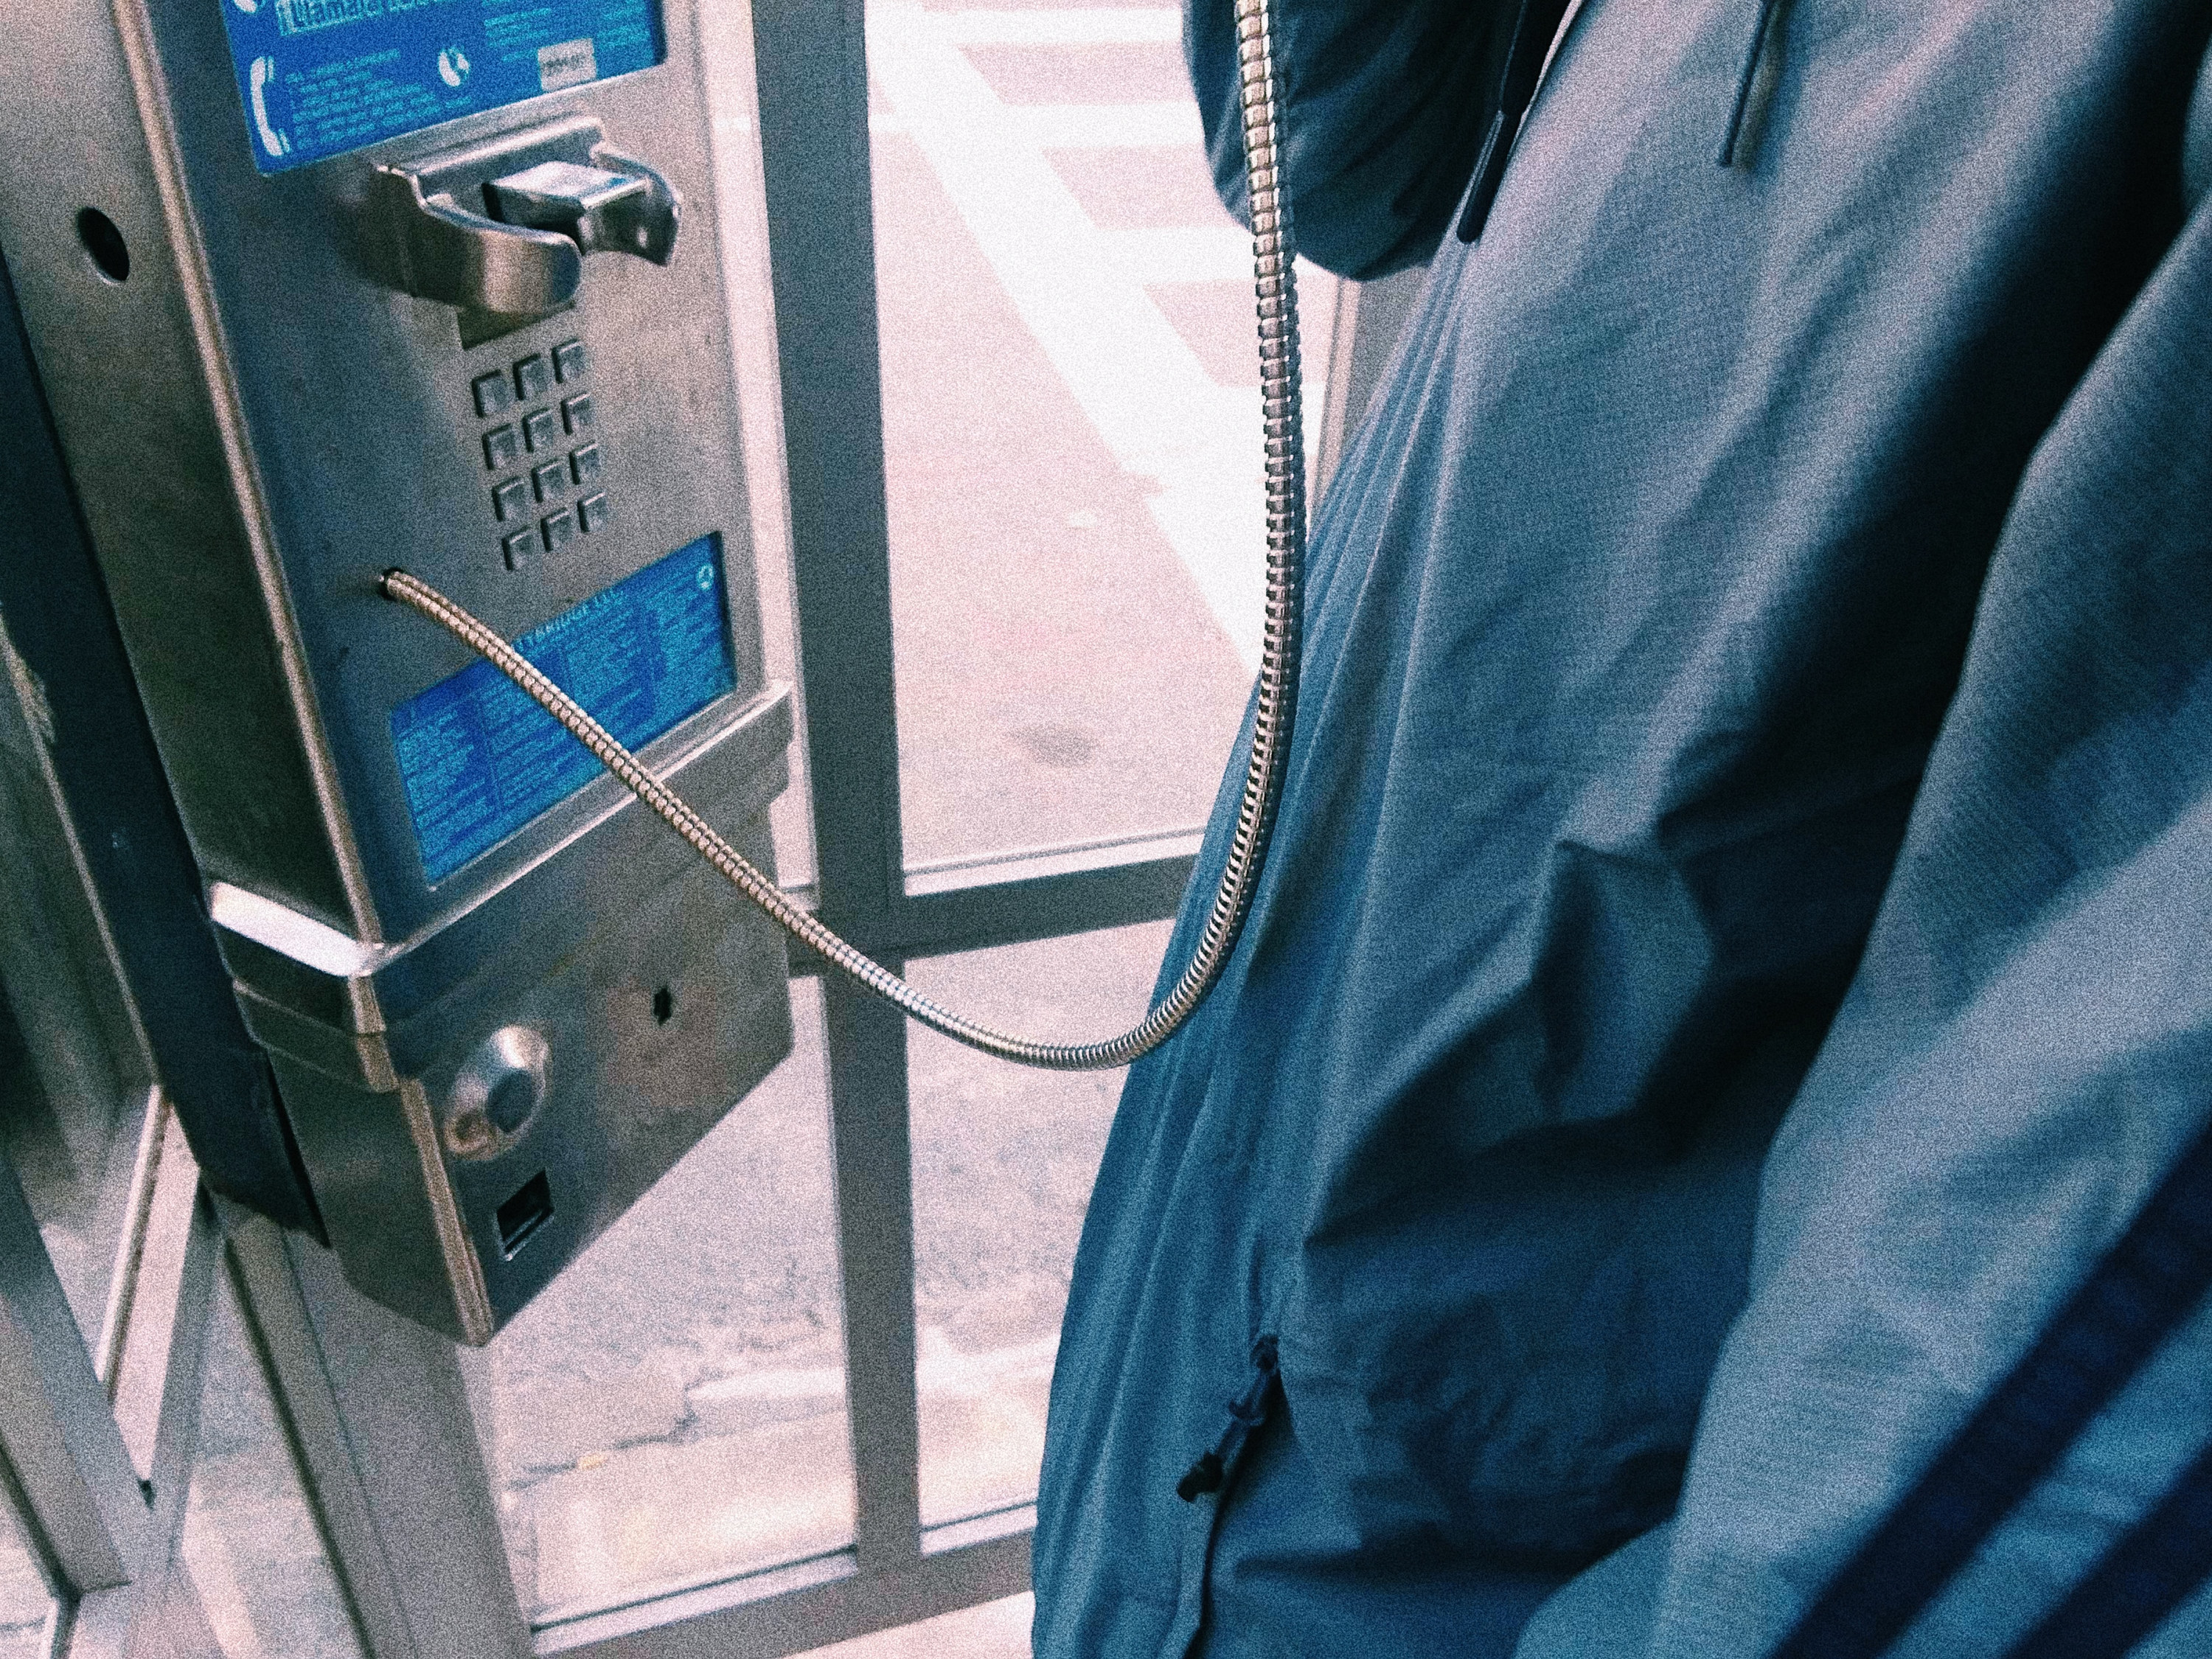 a person using a payphone